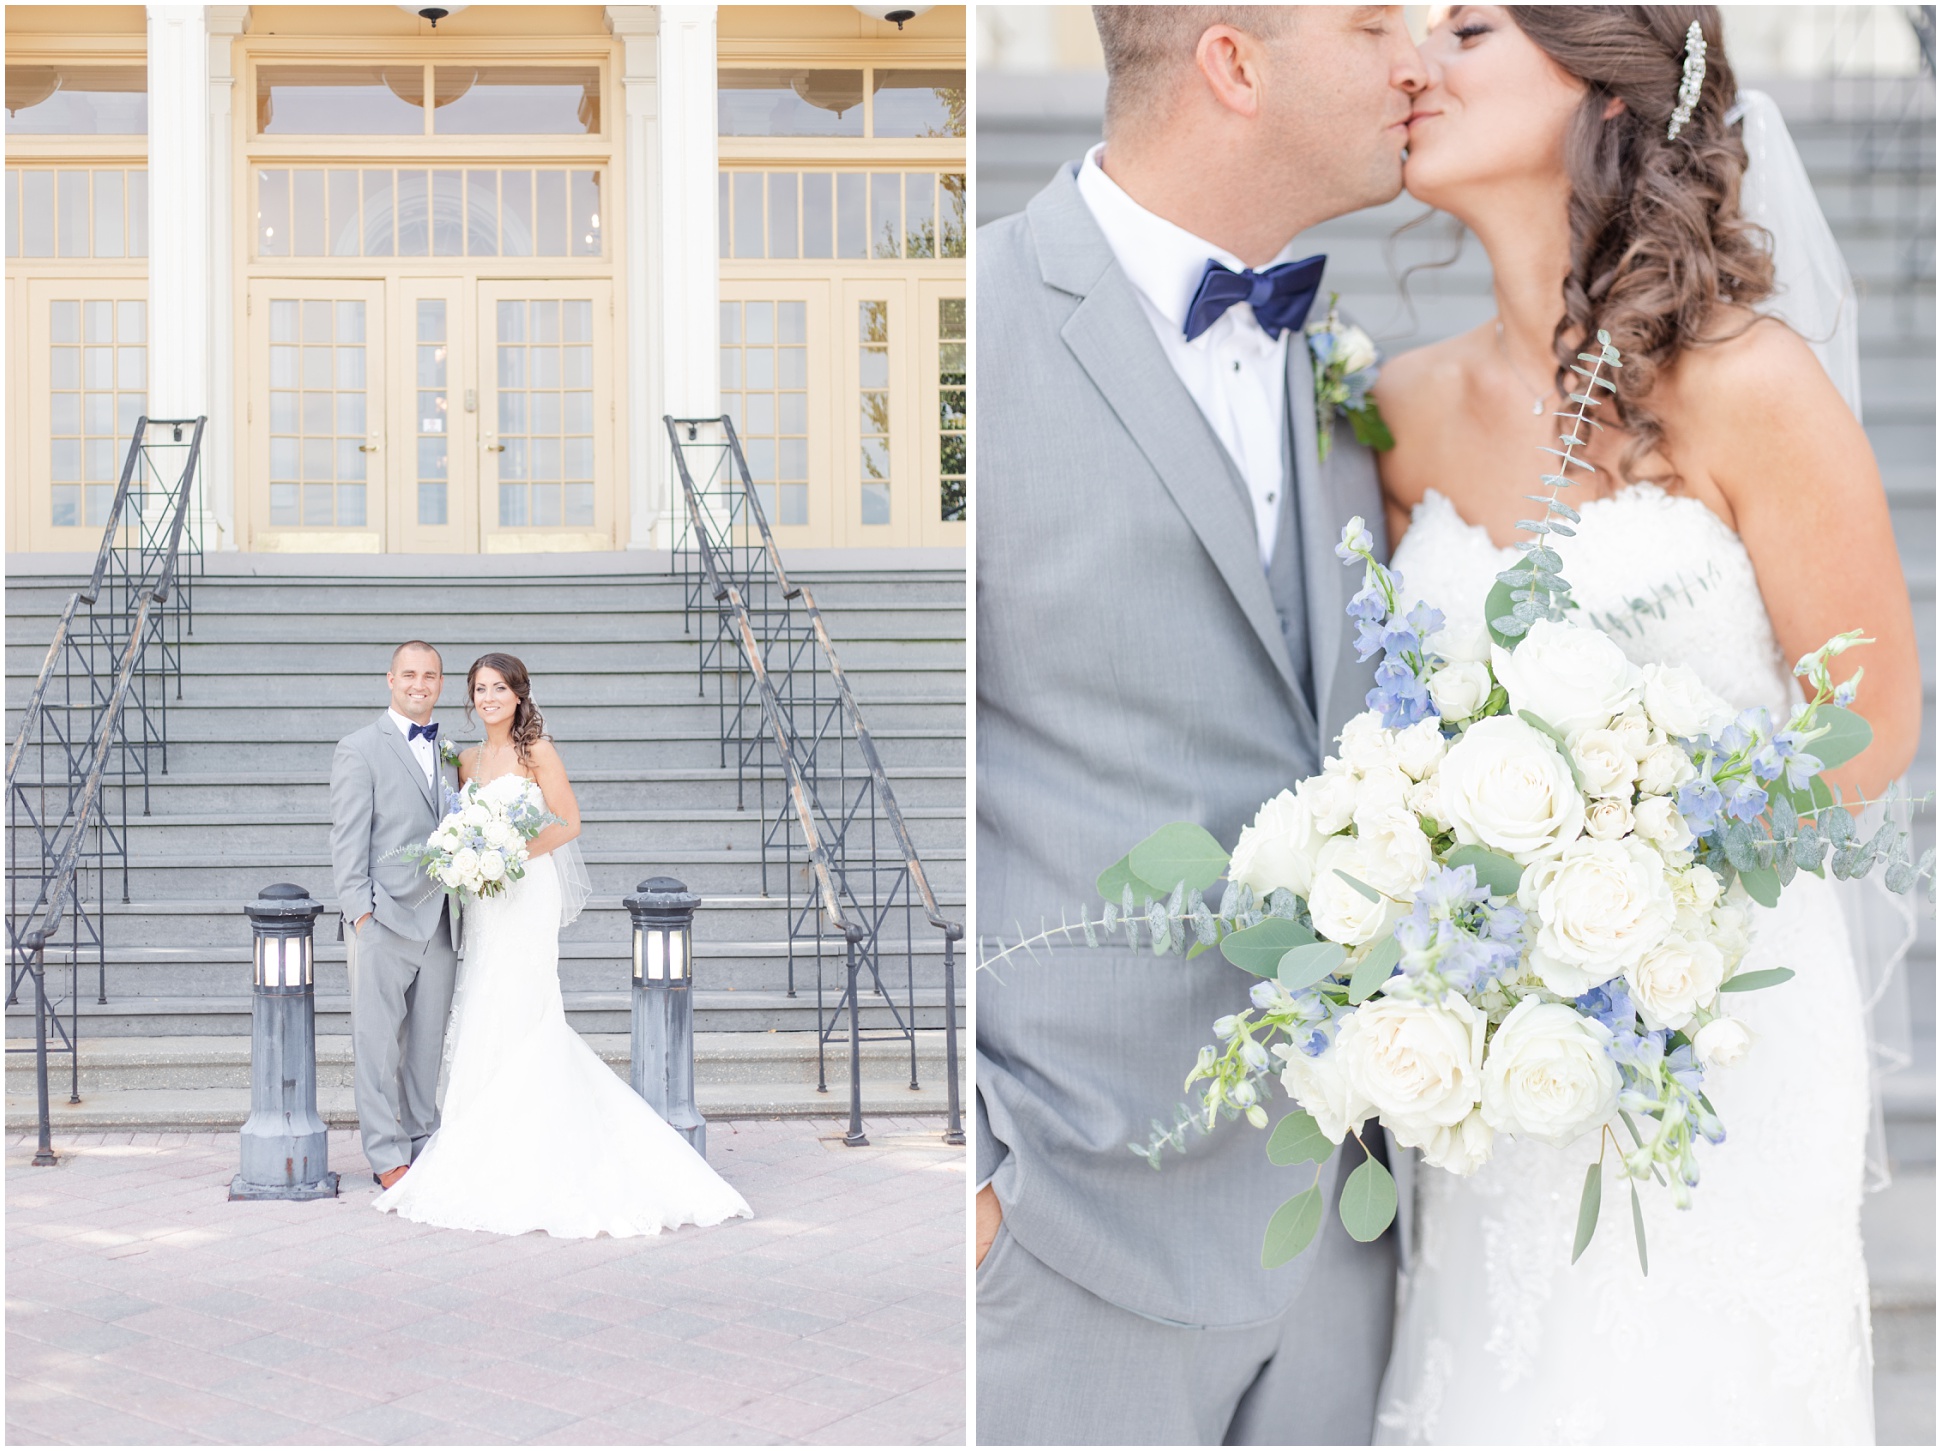 Two images of the bride and groom standing in front of the stairs of the Maryland Zoo Mansion